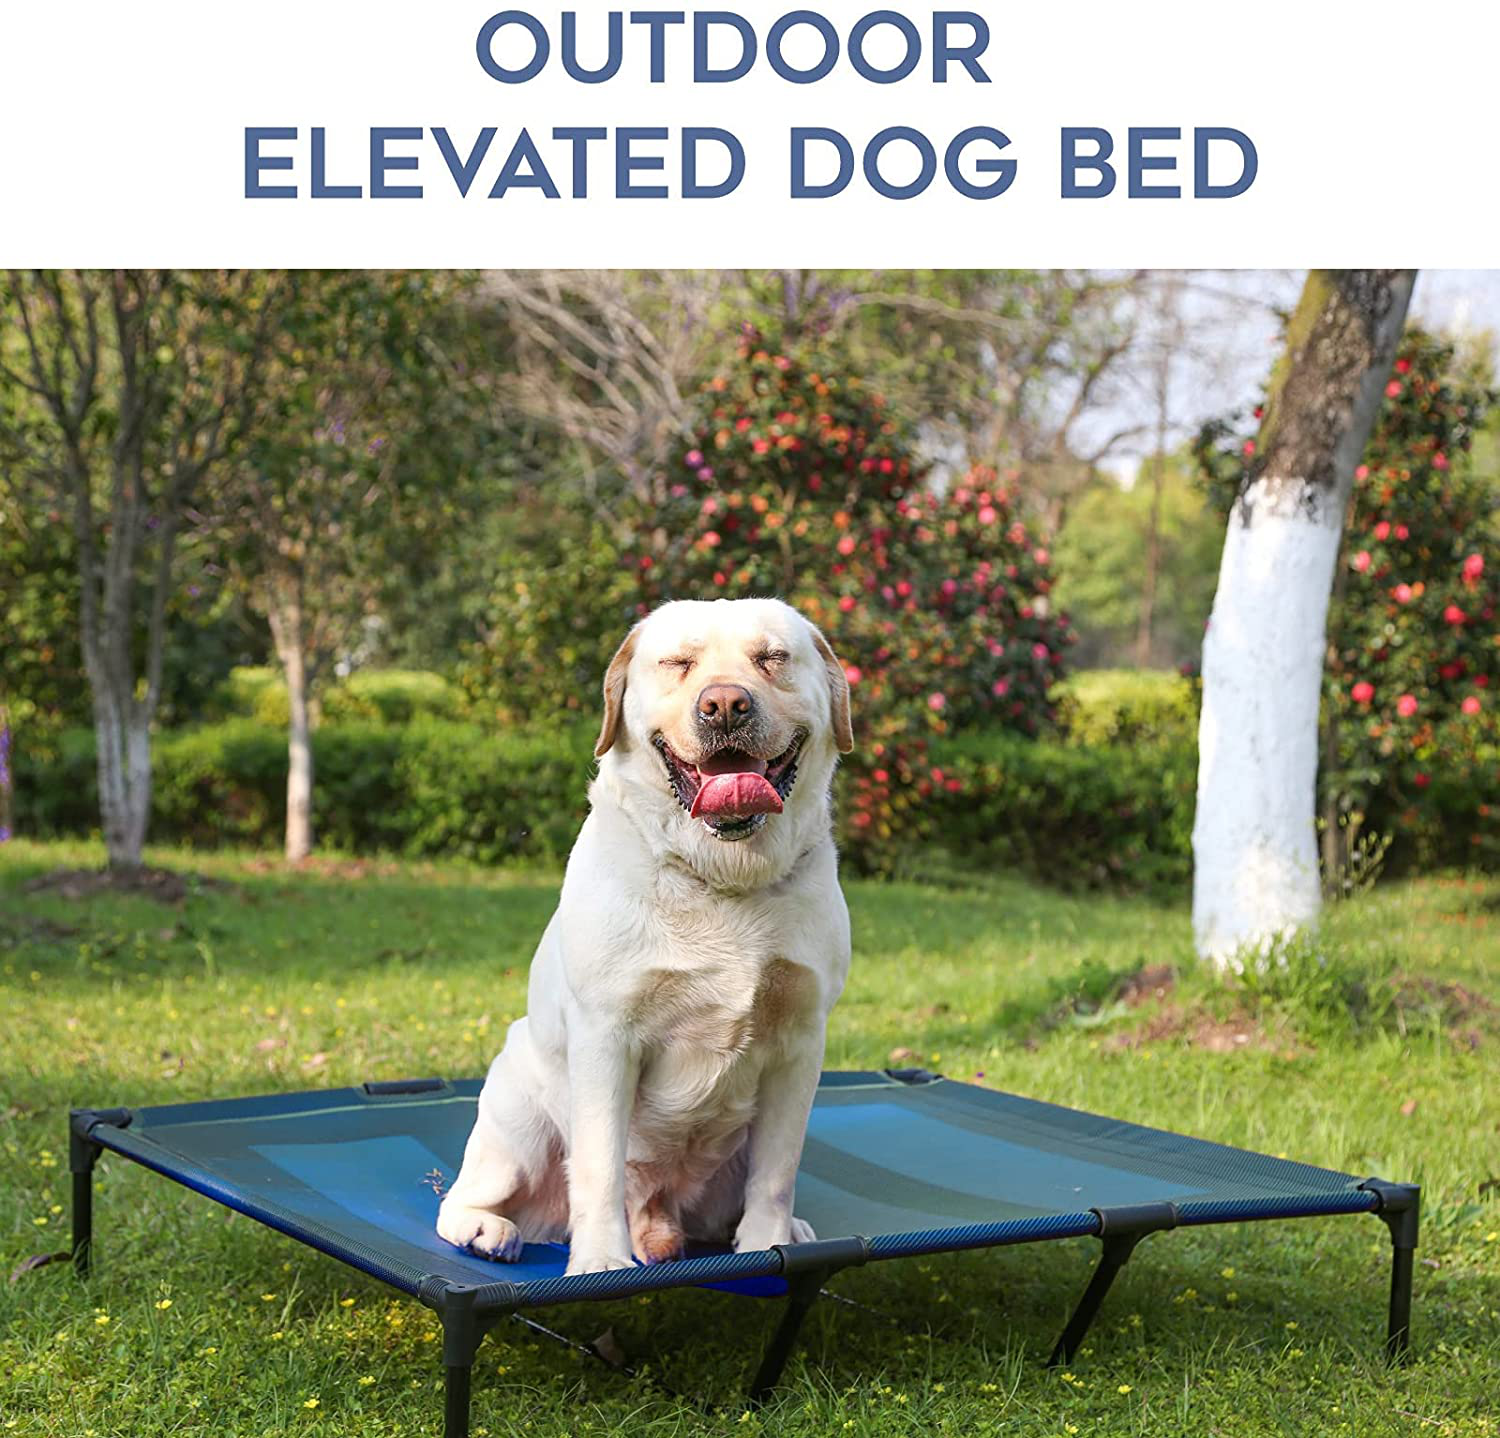 Suddus Elevated Dog Beds Waterproof Outdoor, Portable Raised Dog Bed, Dog Bed off the Floor, Dog Bed Easy Clean Indoor or Outdoor Use, Multiple Sizes…